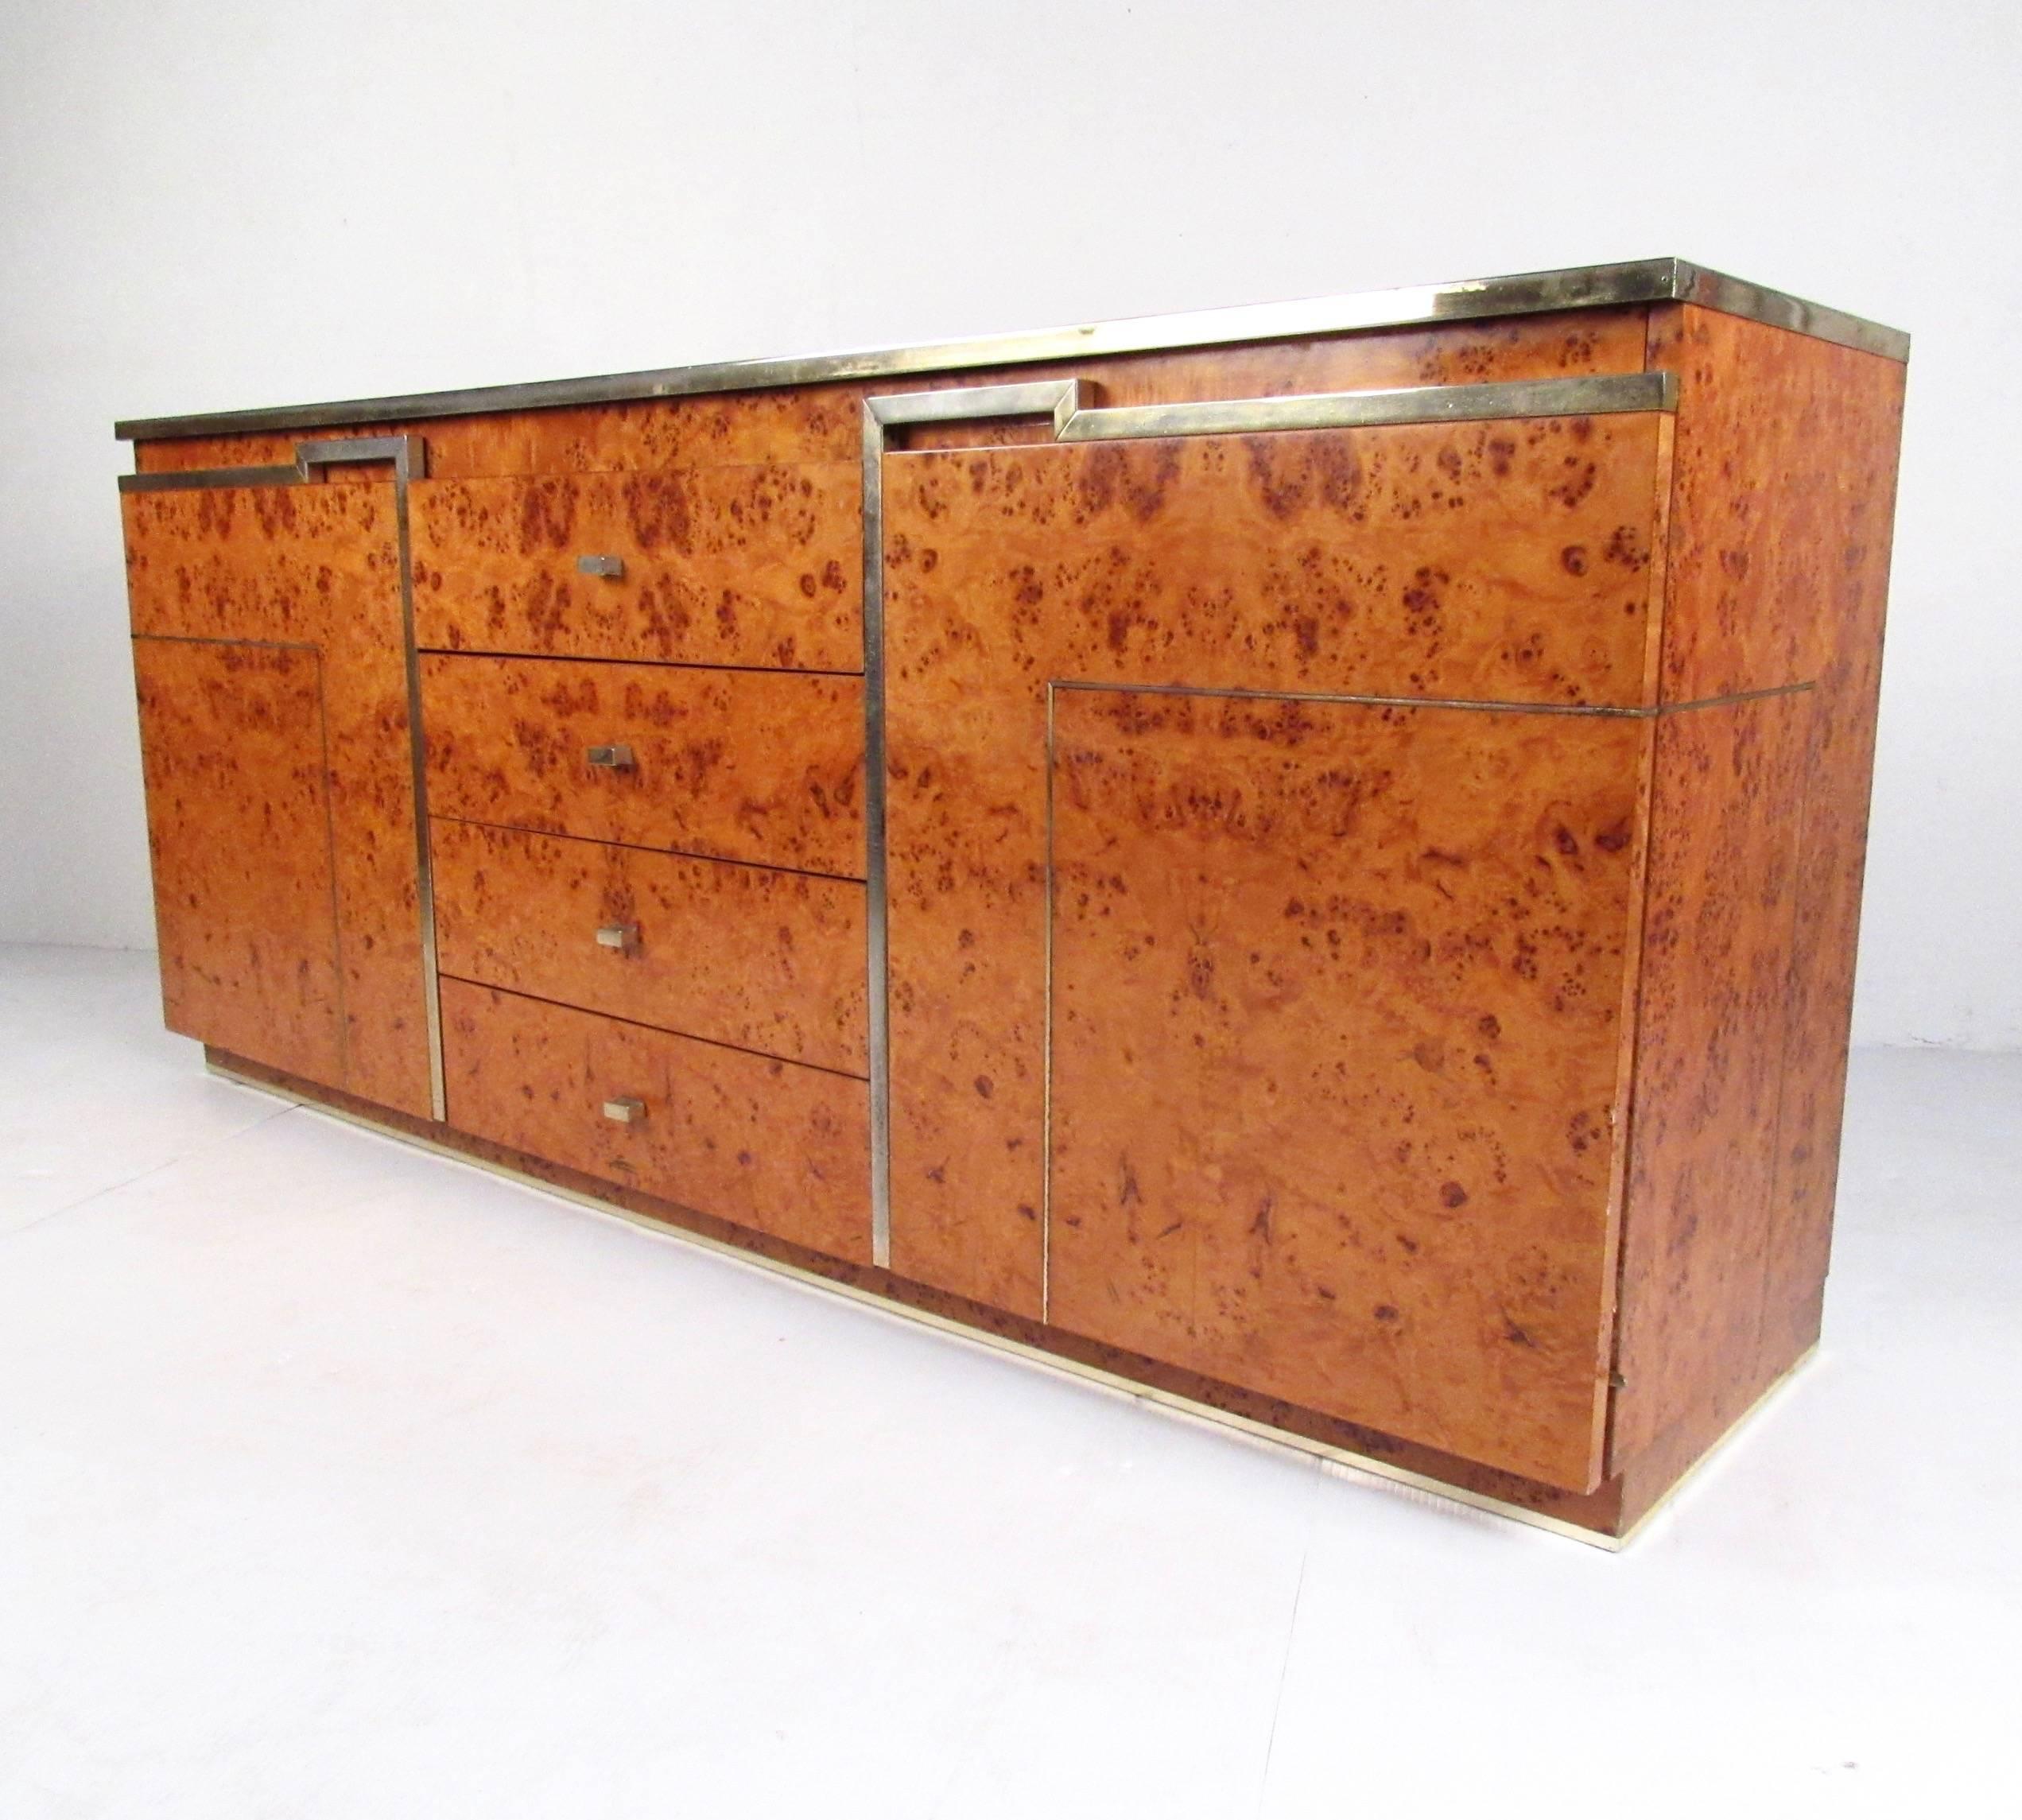 This unique midcentury sideboard features lacquered burl wood finish with brass trim in the style of Romeo Rega offers a stylish and spacious storage option for home or office storage. Carpathian elm with vintage lacquer creates a unique Italian